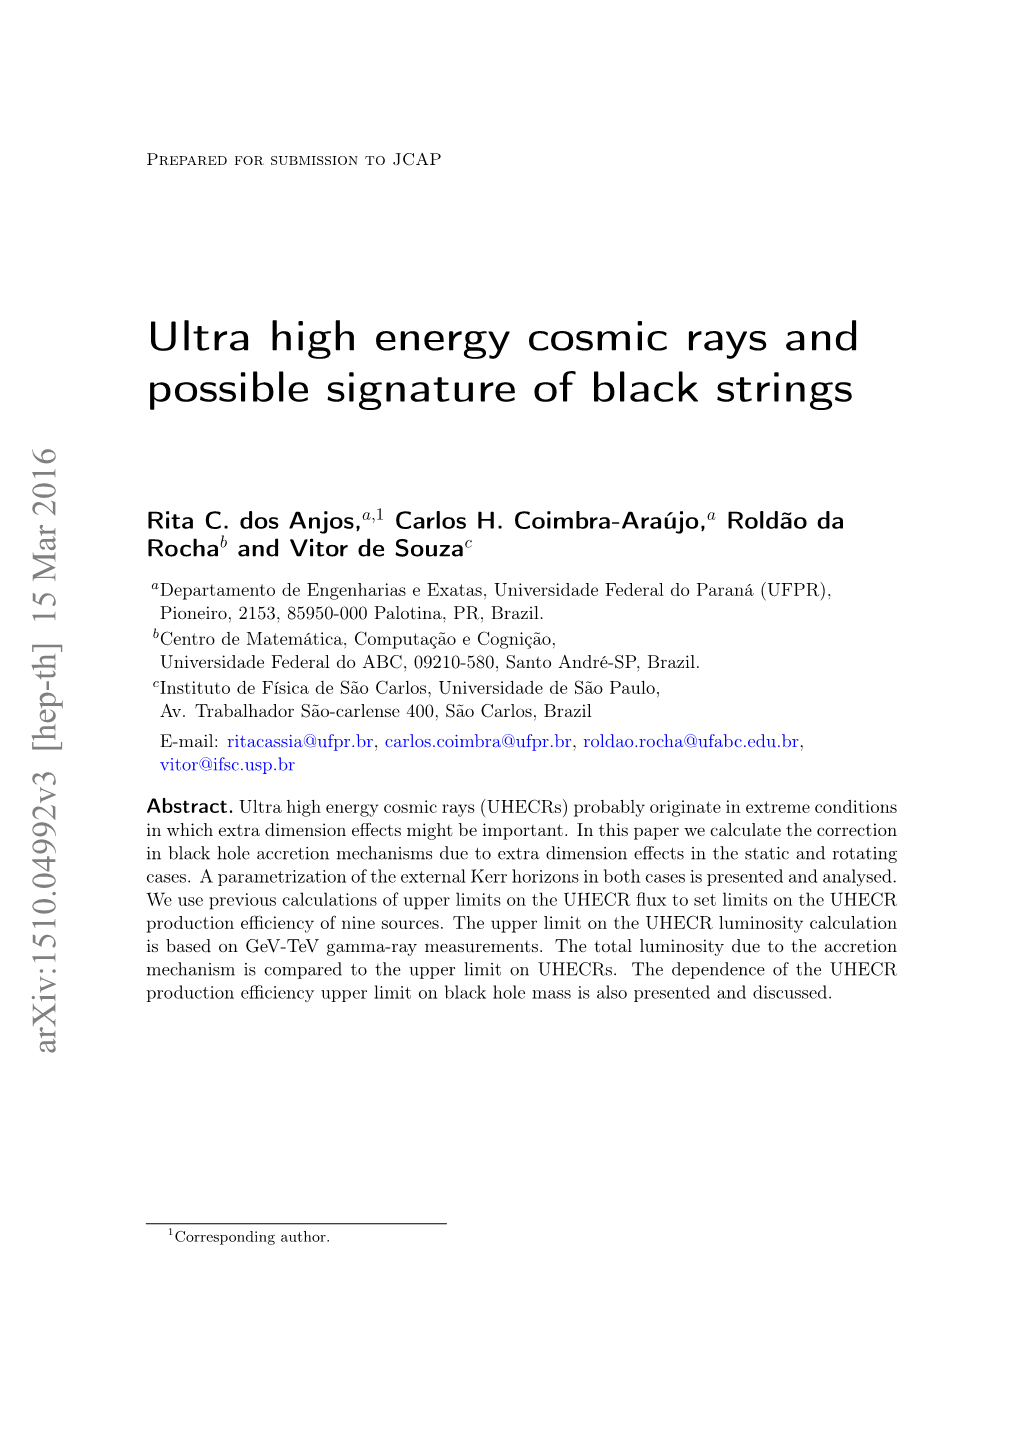 Ultra High Energy Cosmic Rays and Possible Signature of Black Strings